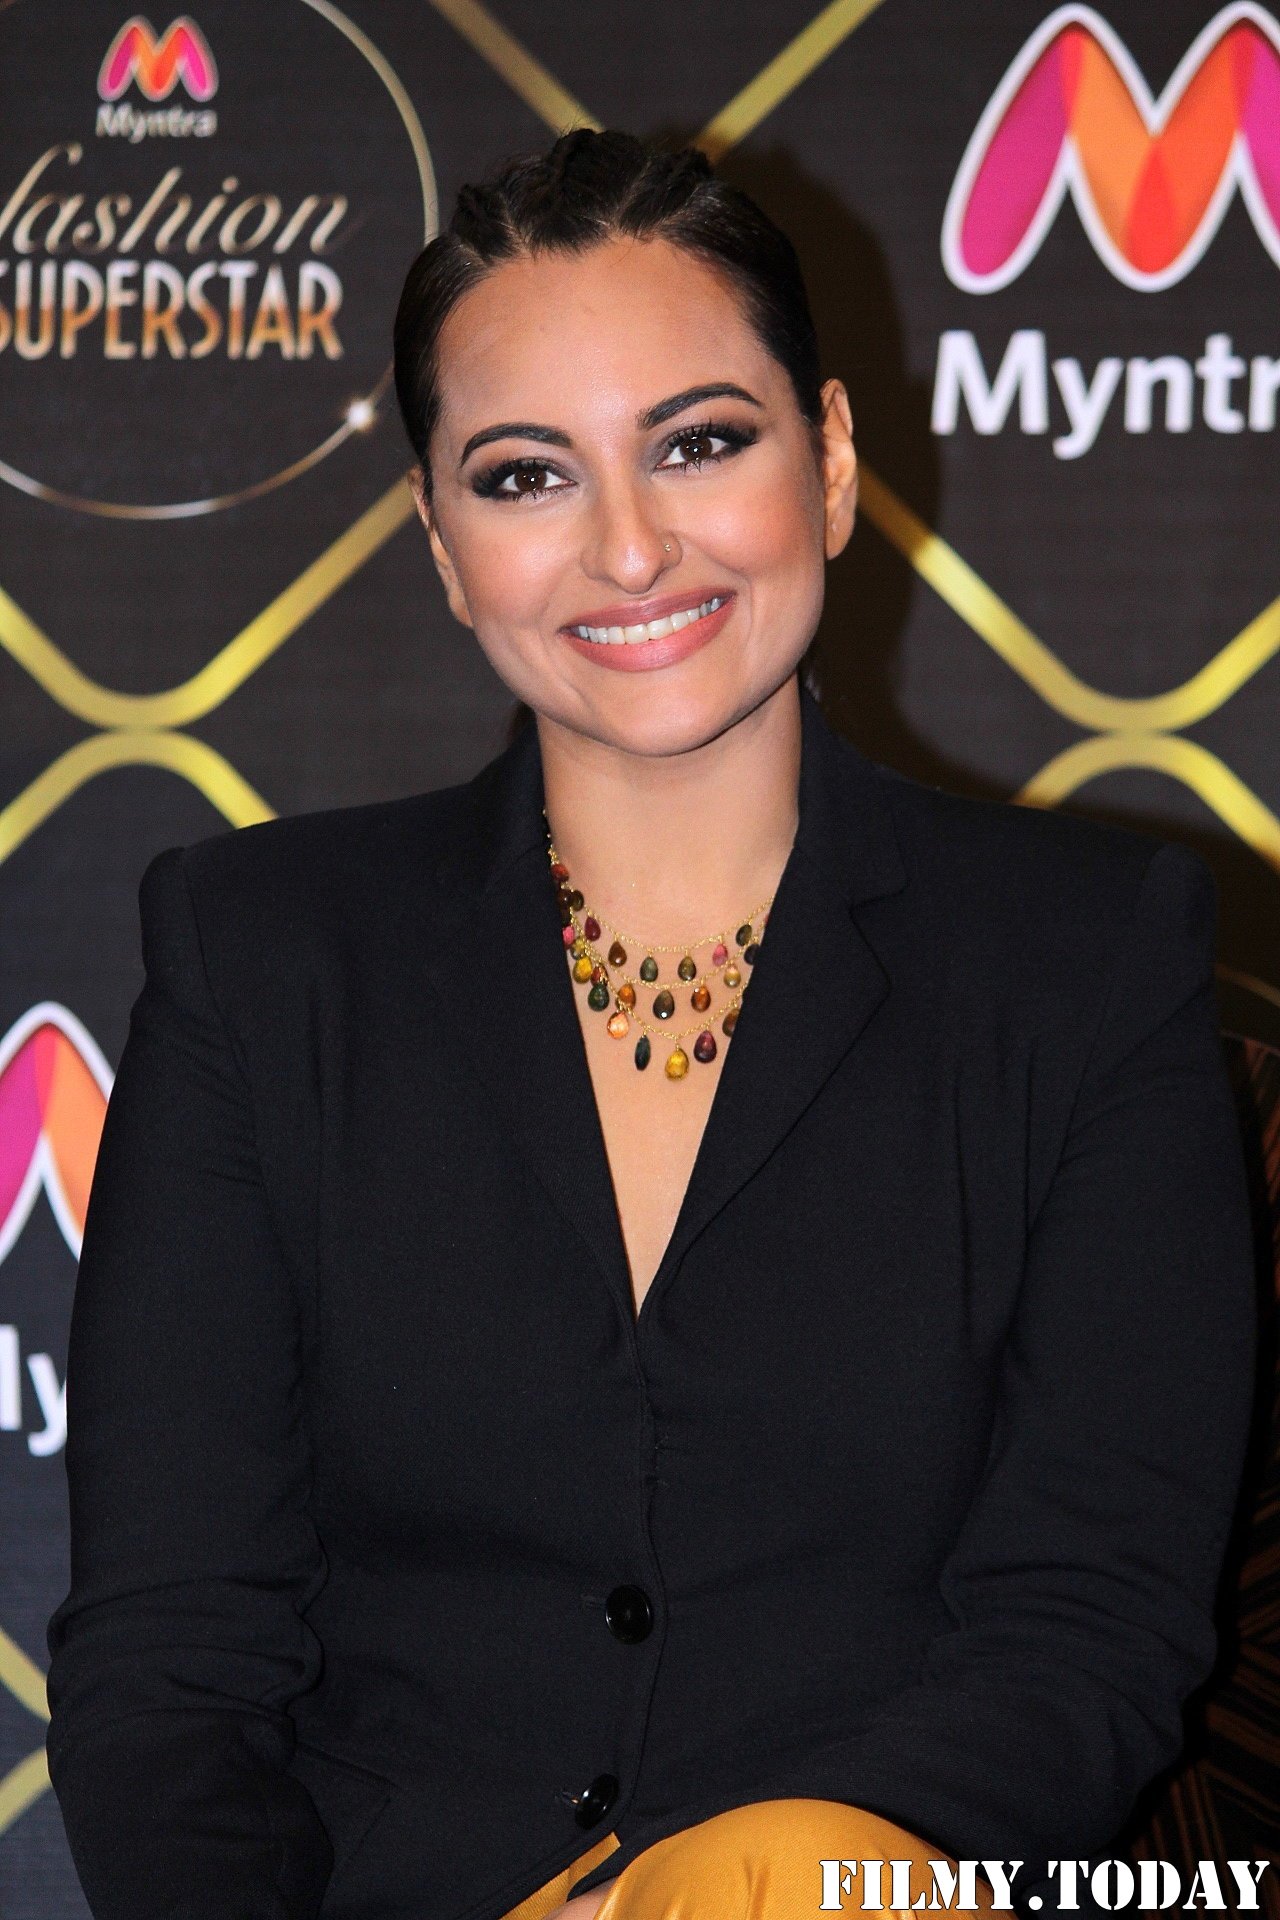 Photos: Sonakshi Sinha At The Launch Of ‘Fashion Superstar’ | Picture 1680818